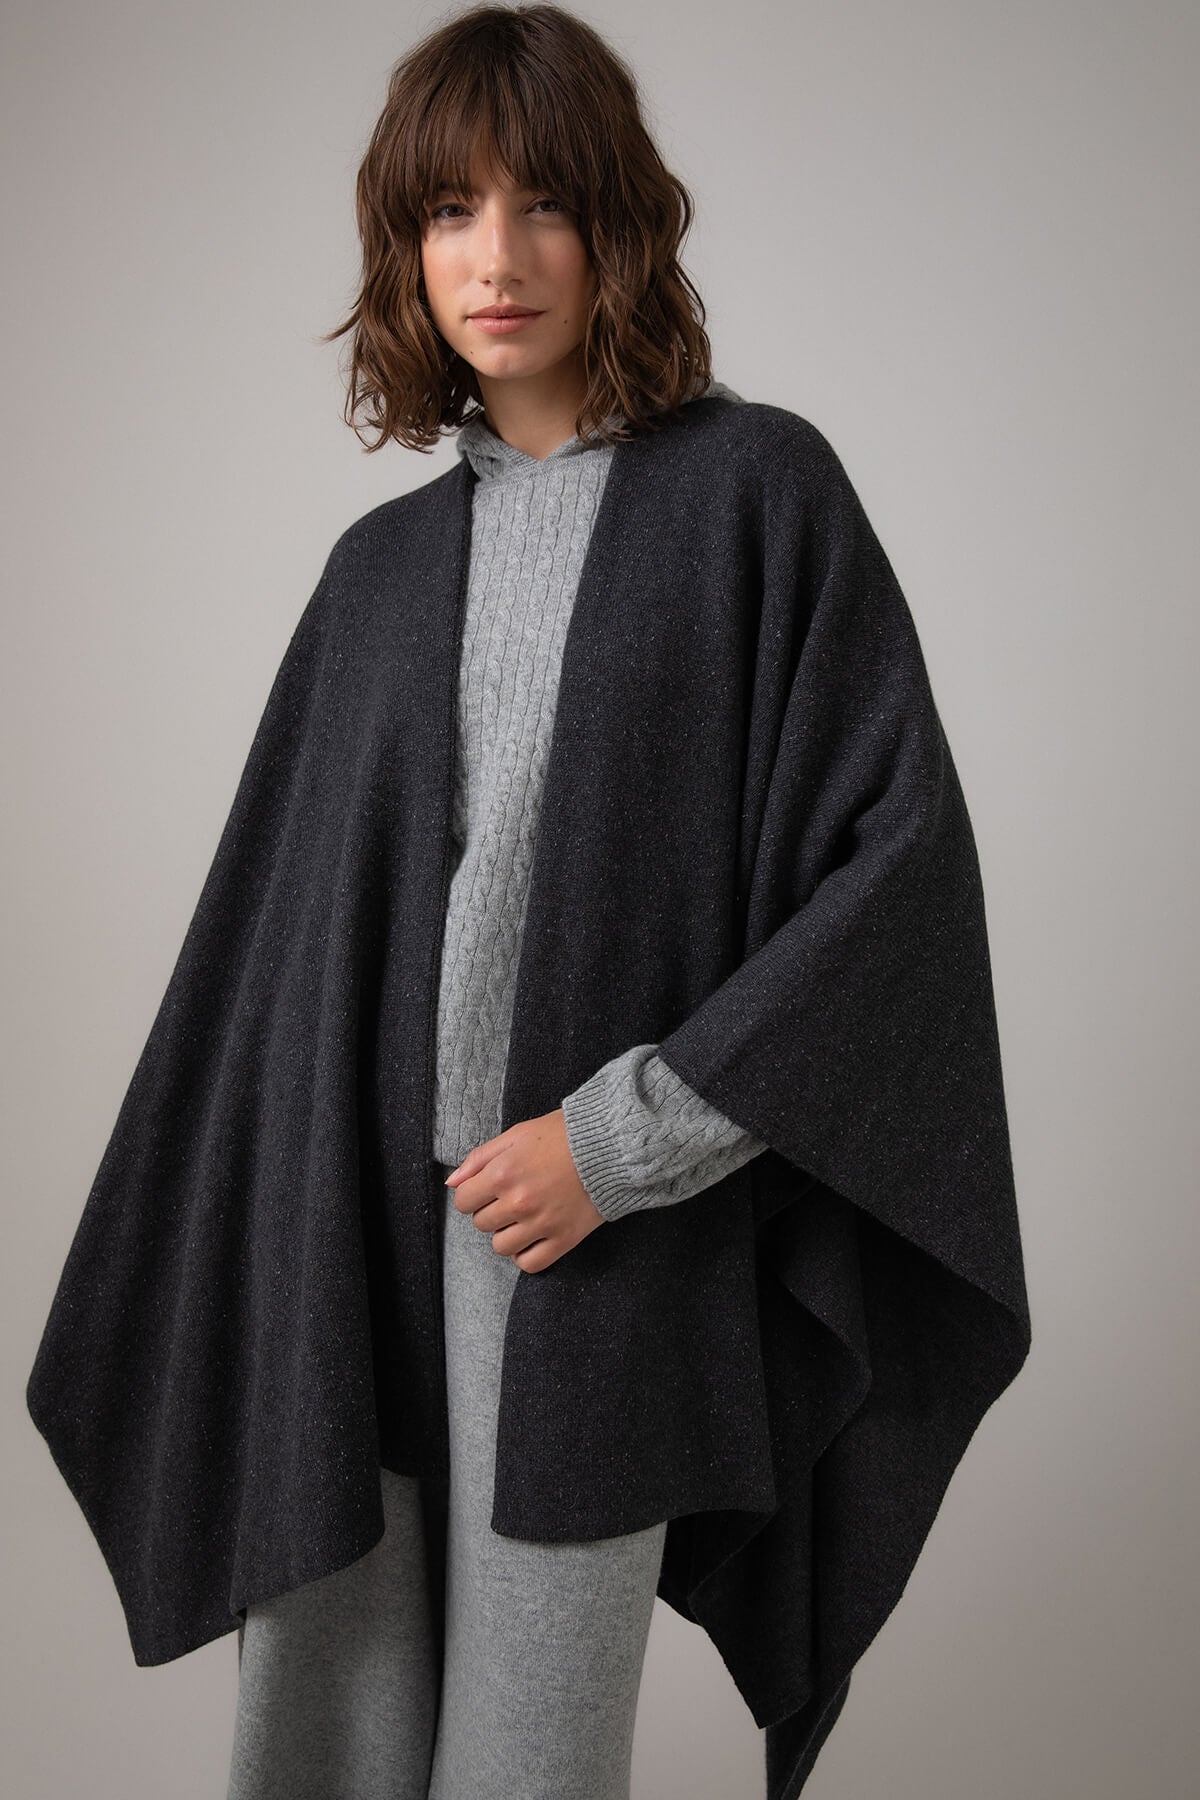 Johnstons of Elgin Double Face Donegal Cashmere Cape in Charcoal worn with Grey Cable Cashmere Hoodie on a grey background KAA05102Q23681ONE